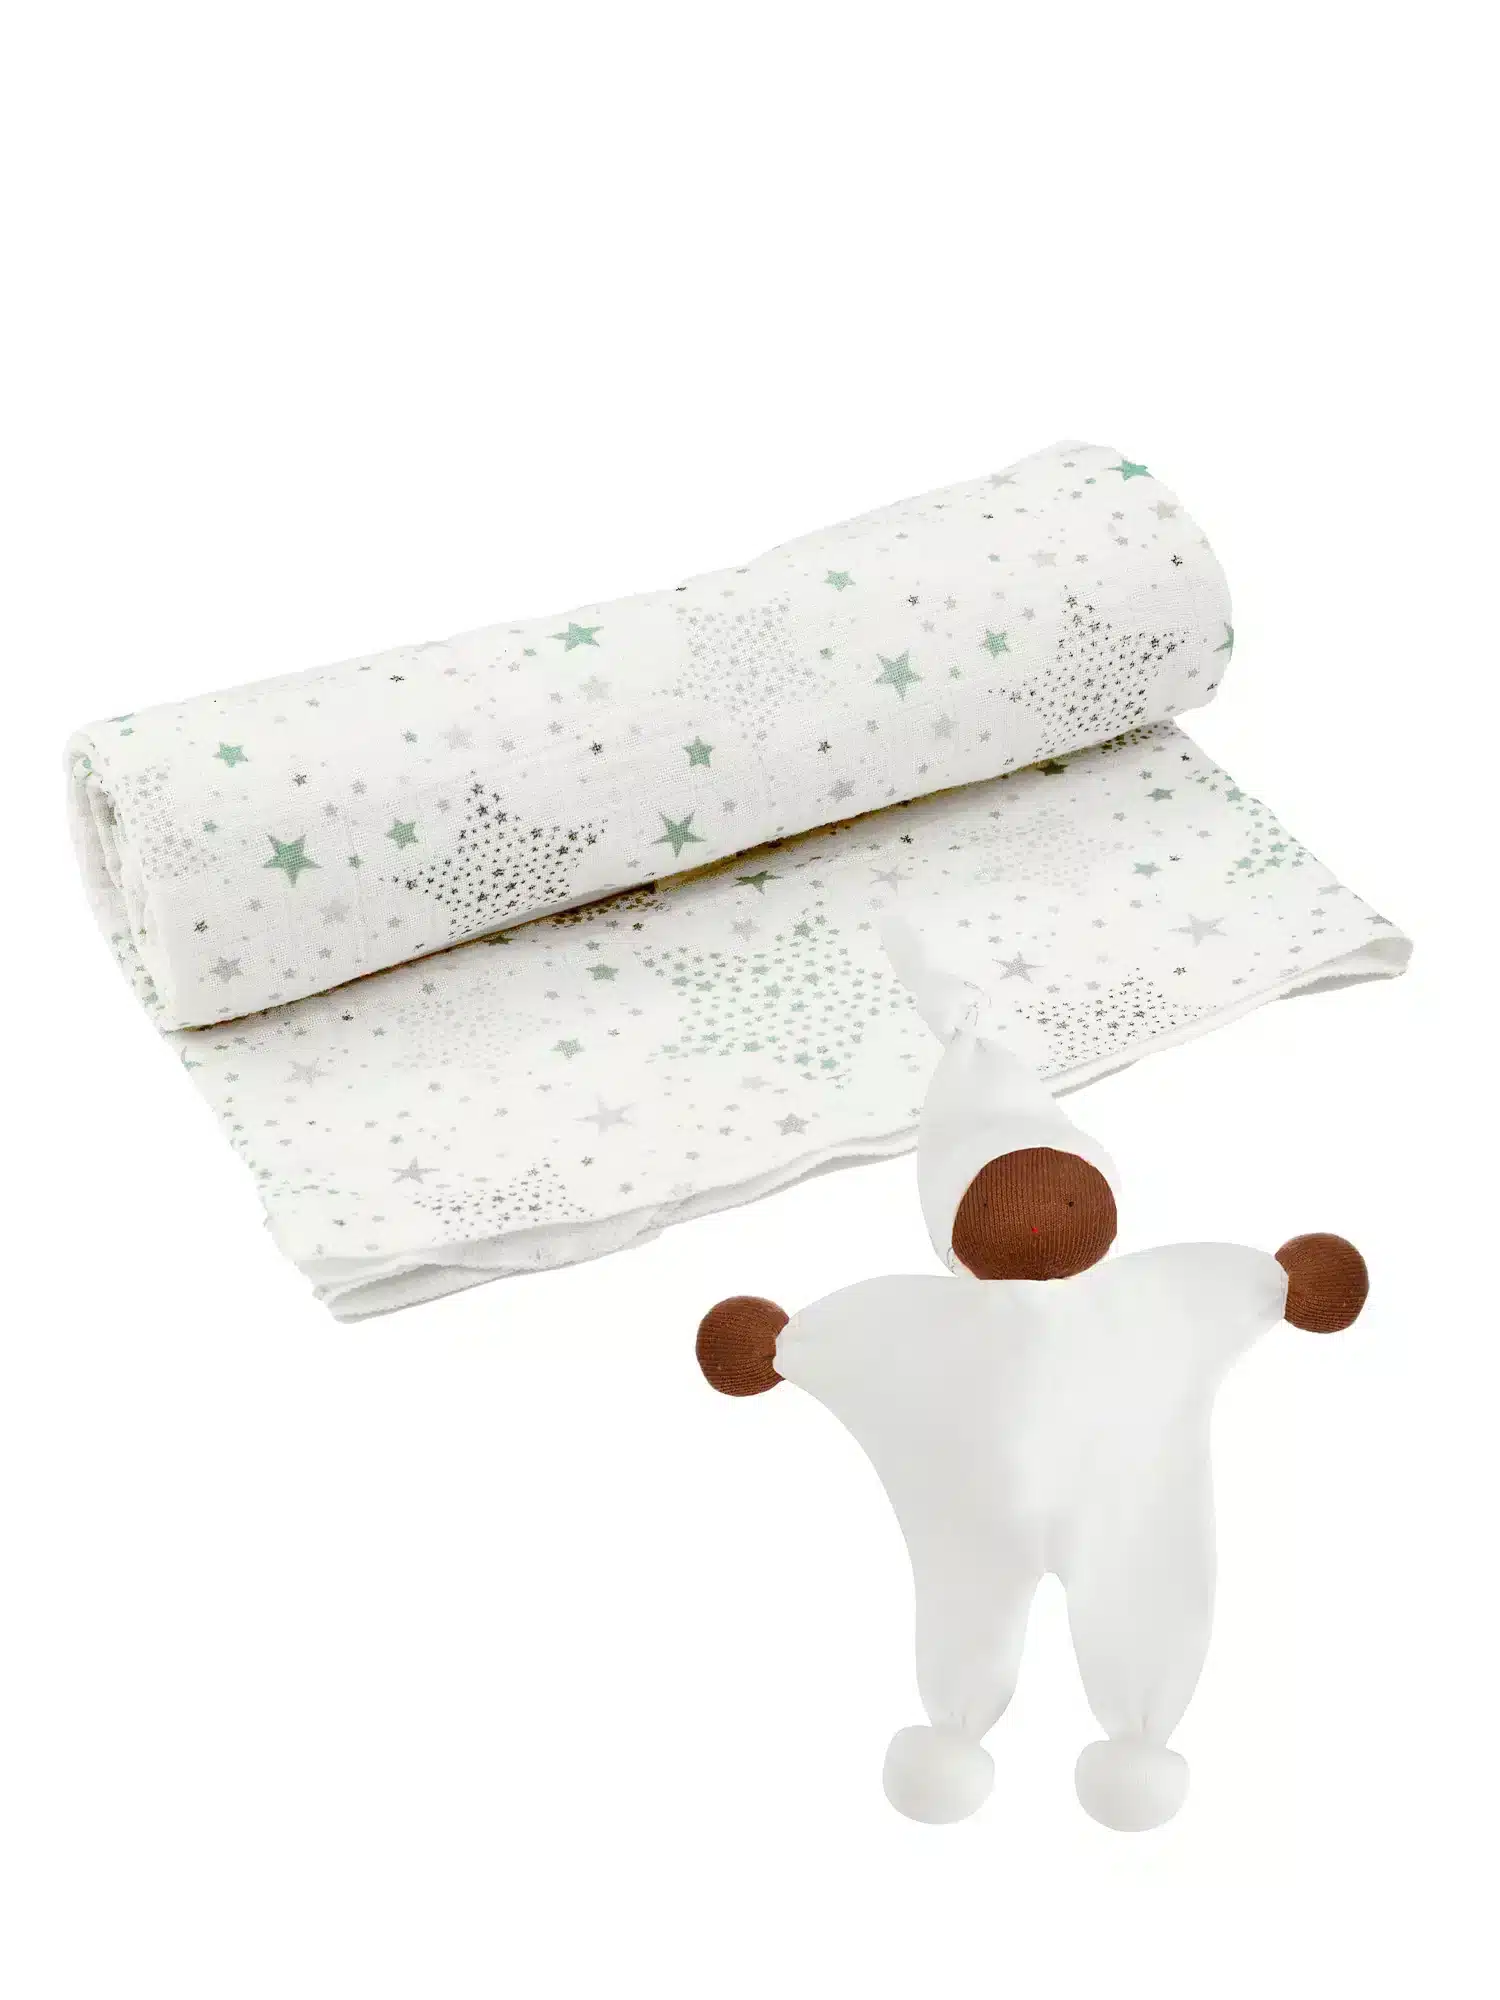 Under the Nile Twinkle Muslin Swaddle And African American Baby Buddy Gift Set from Gimme the Good Stuff